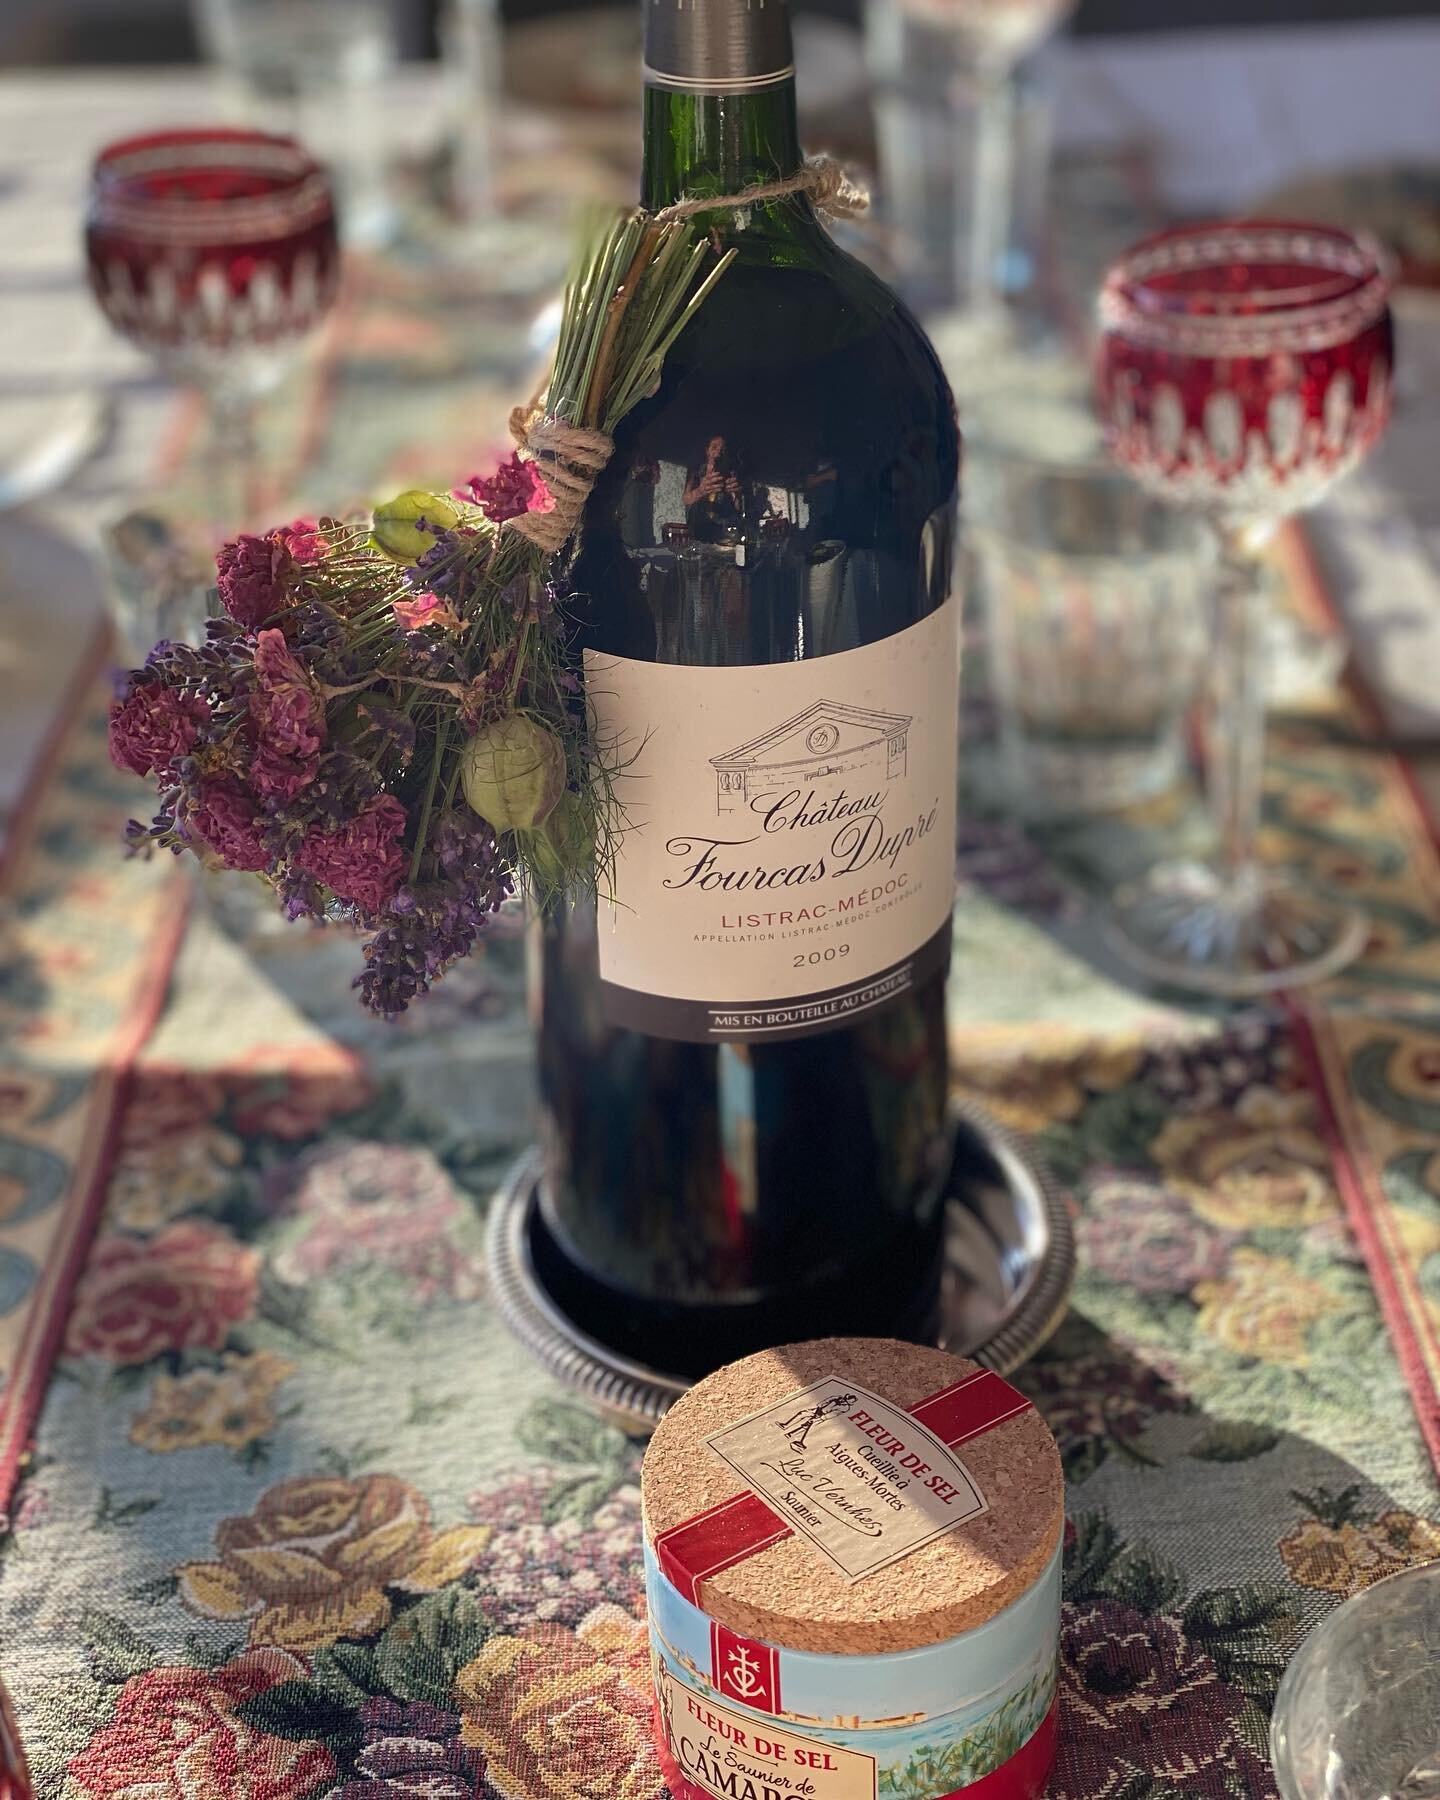 A lovely table with the sun setting. And a lovely wine. 
#tablesetting #dinnerparty #yummywine